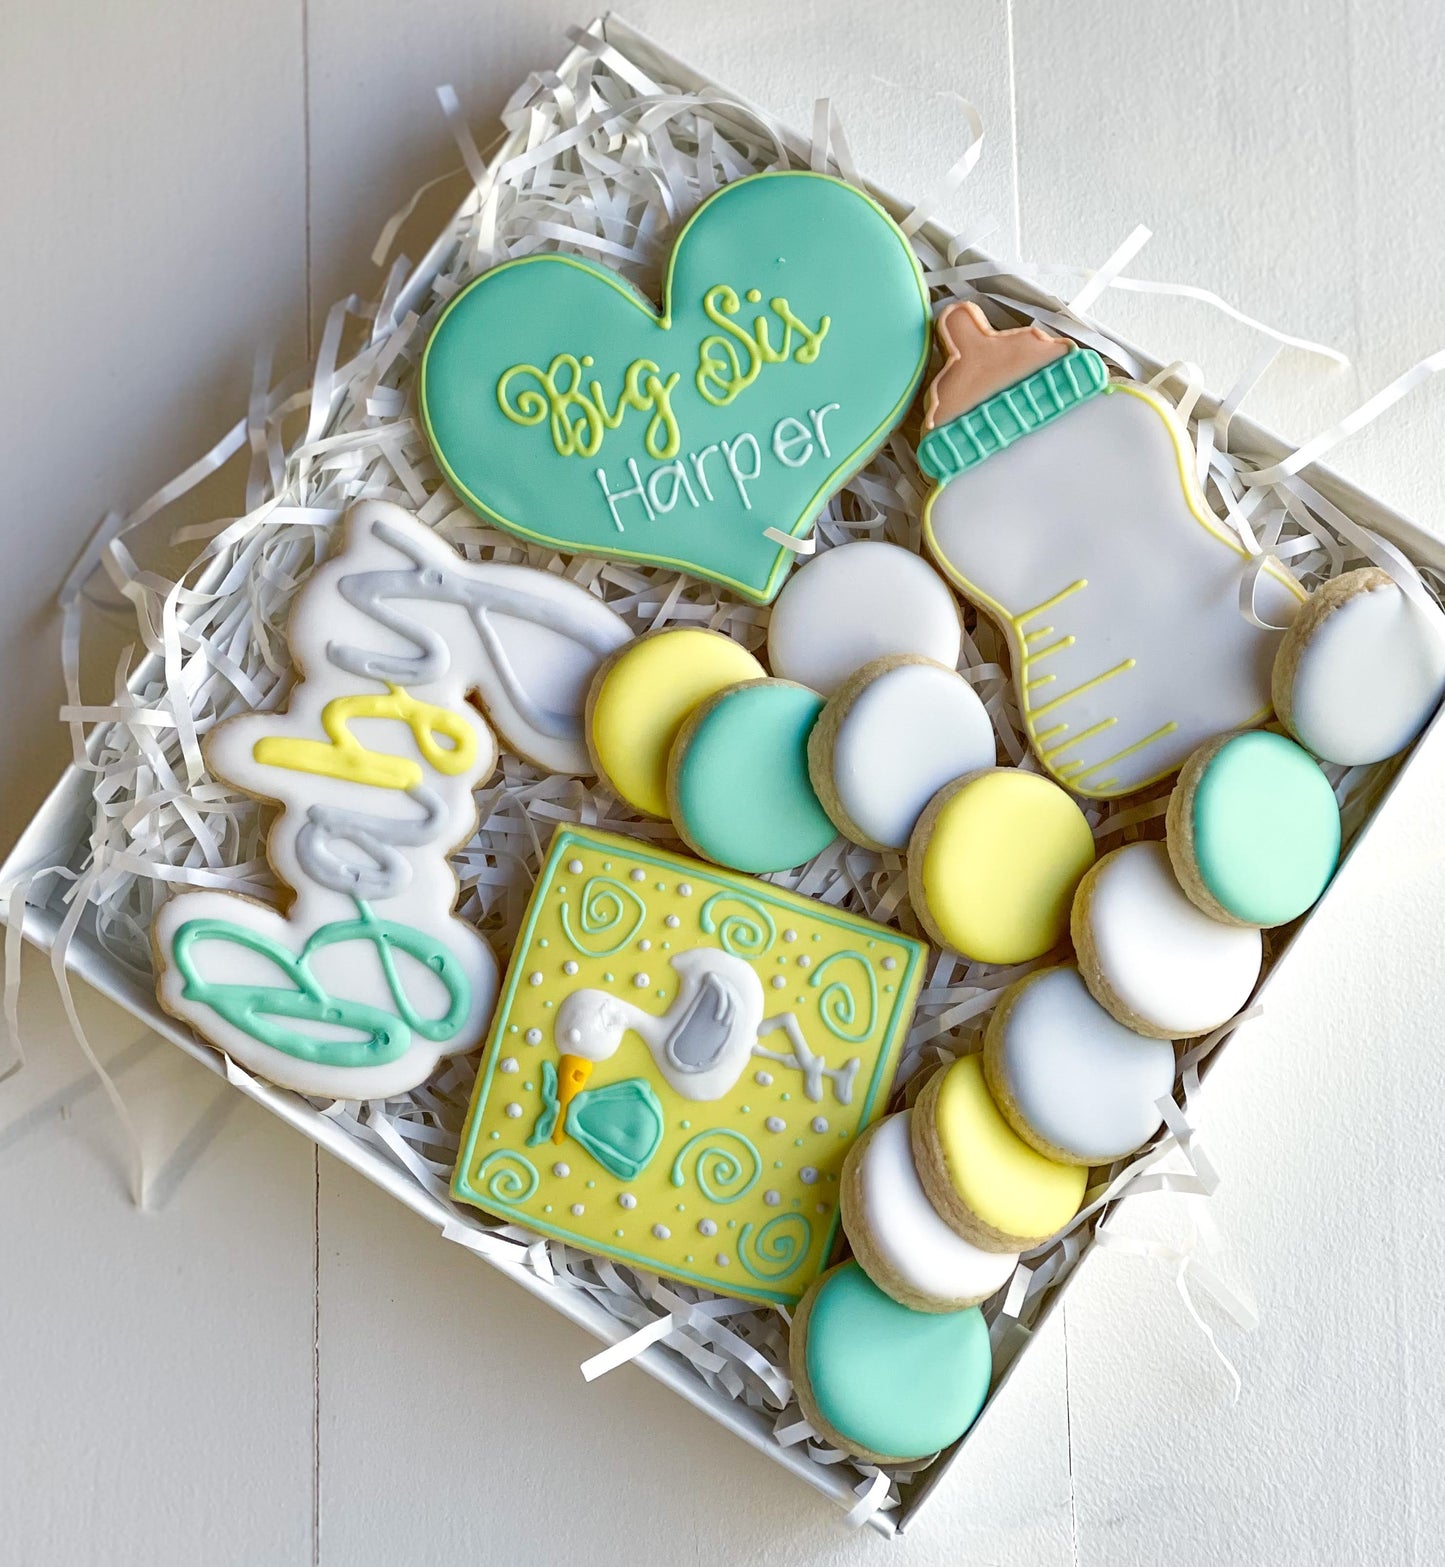 PERSONALIZED Cookie GIFTS - Premium Cookies Custom Wrapped and Shipped